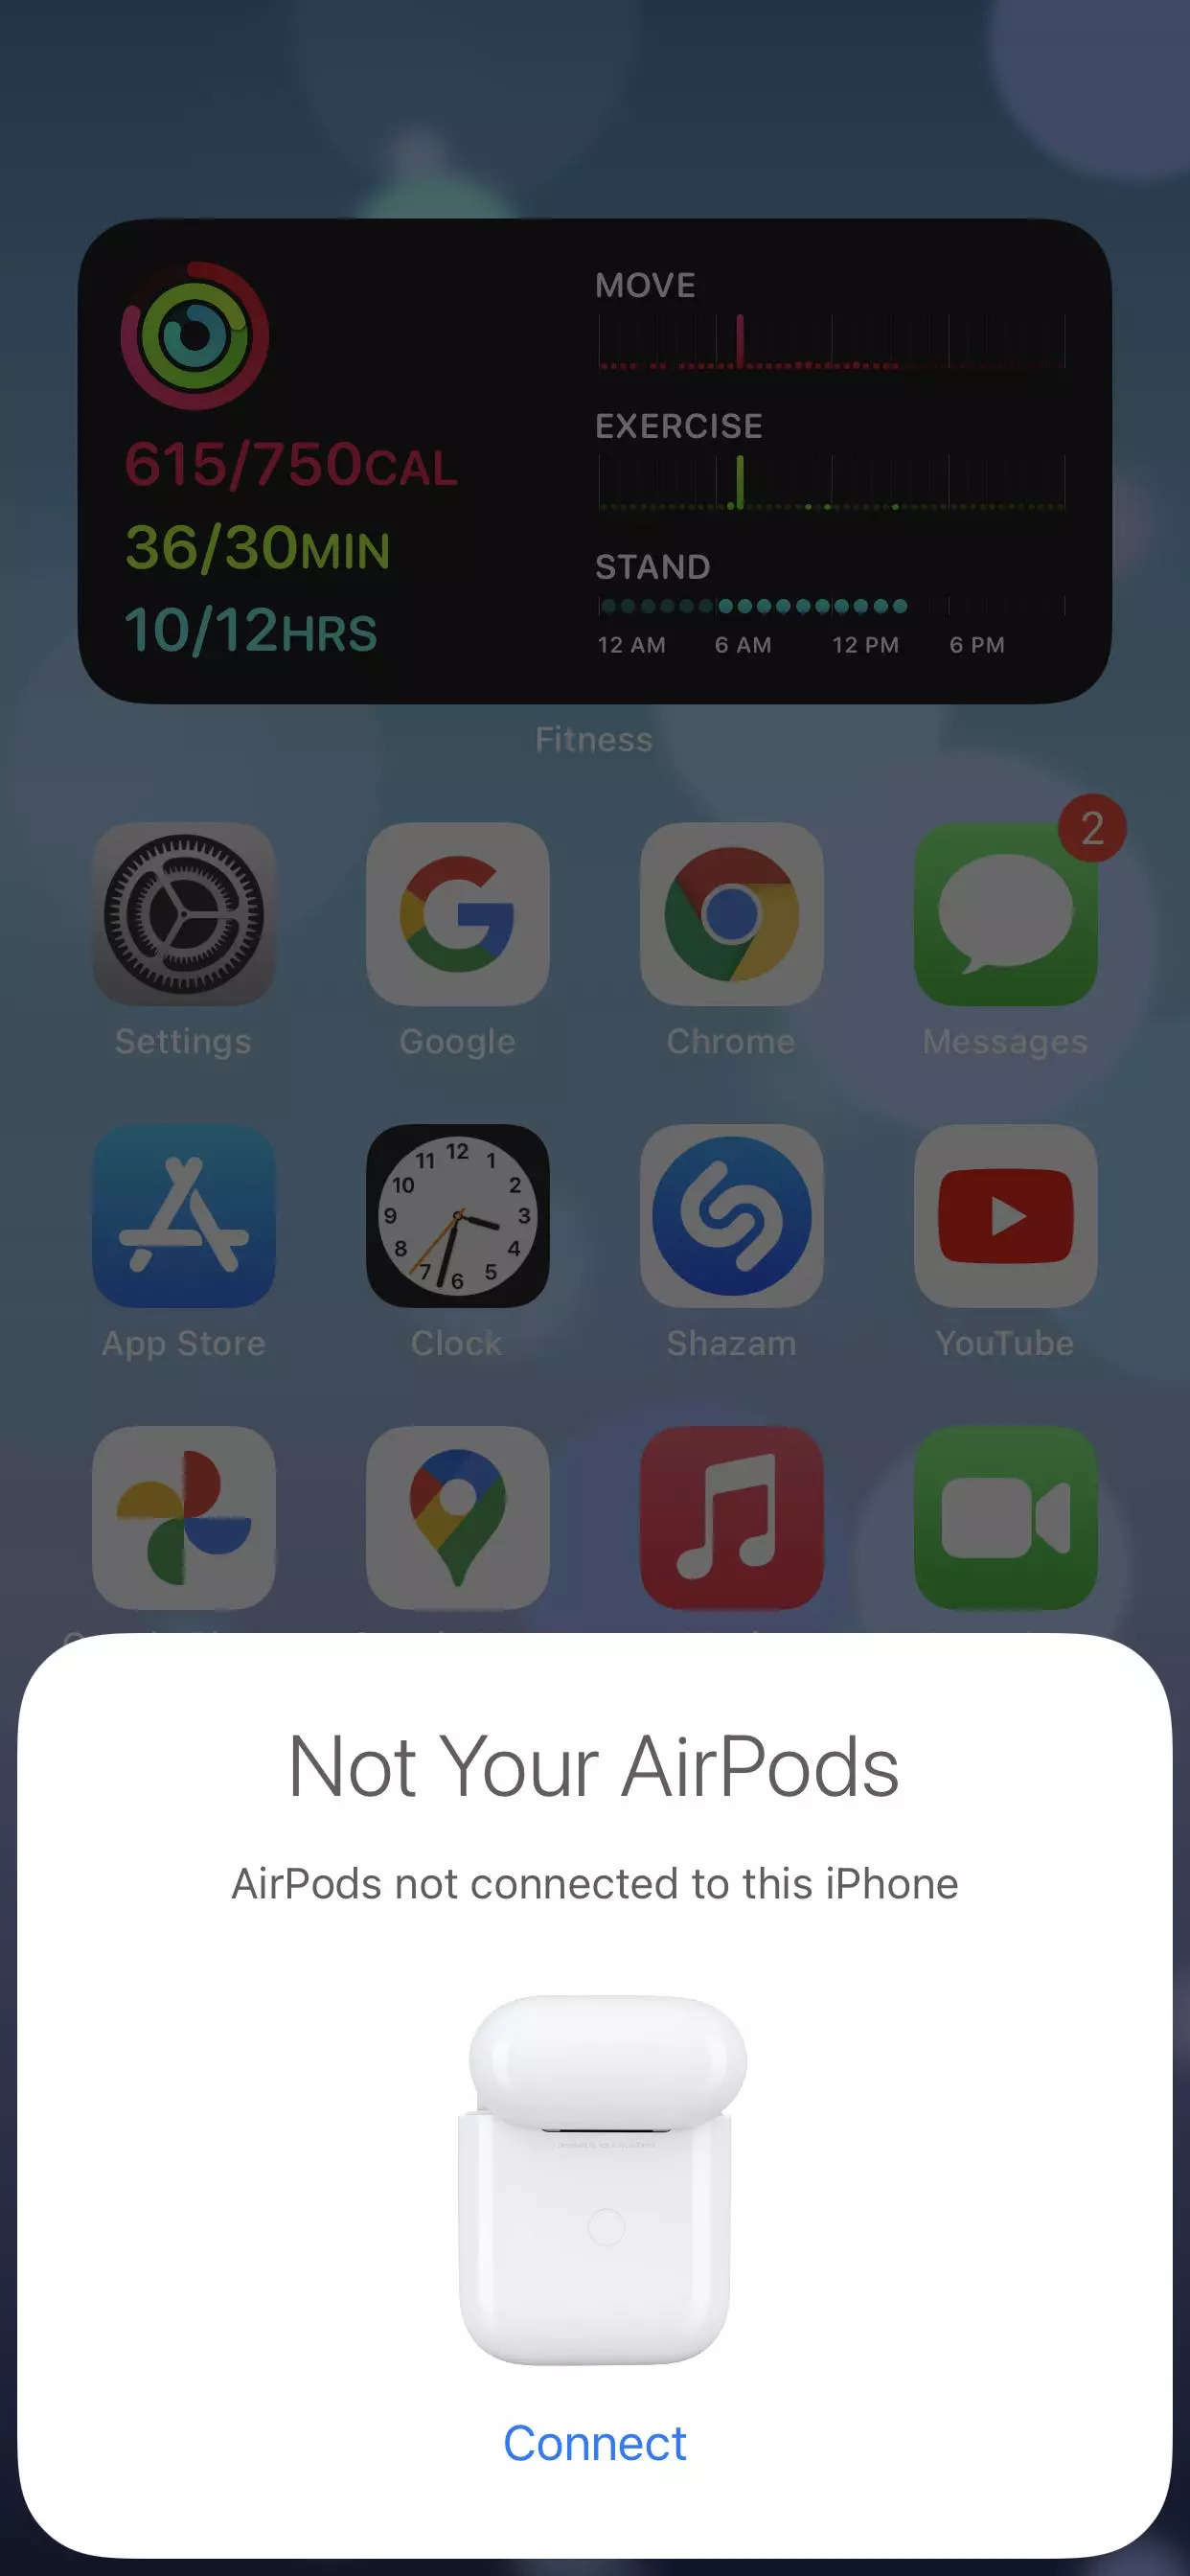 How to connect any AirPods to your iPhone